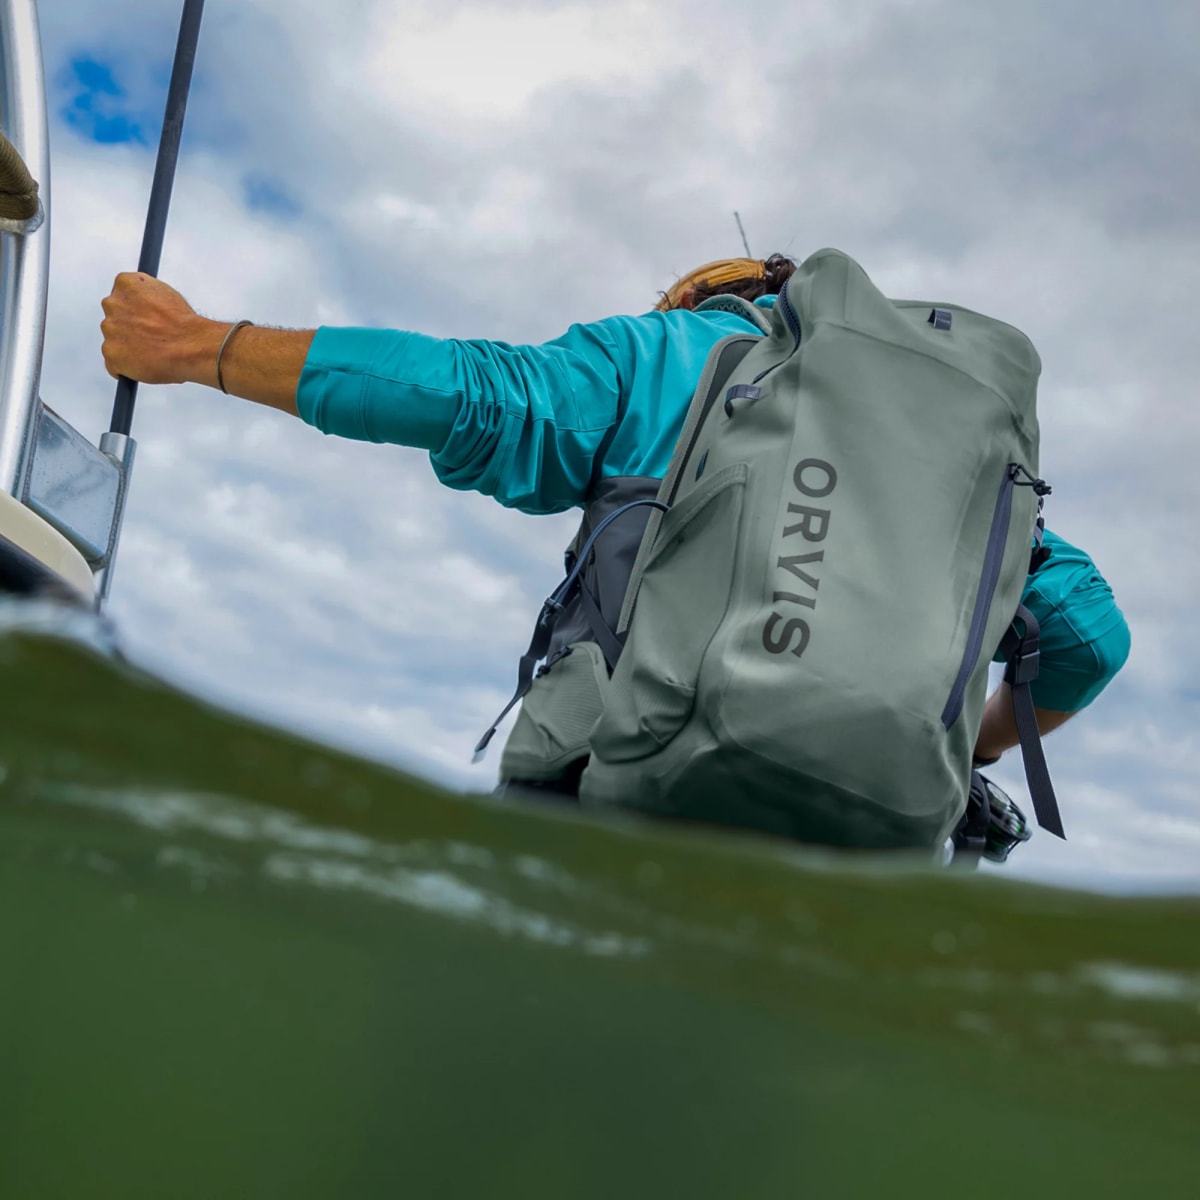 YETI's Collection of Dry Bags is Sure to Keep Your Gear Protected